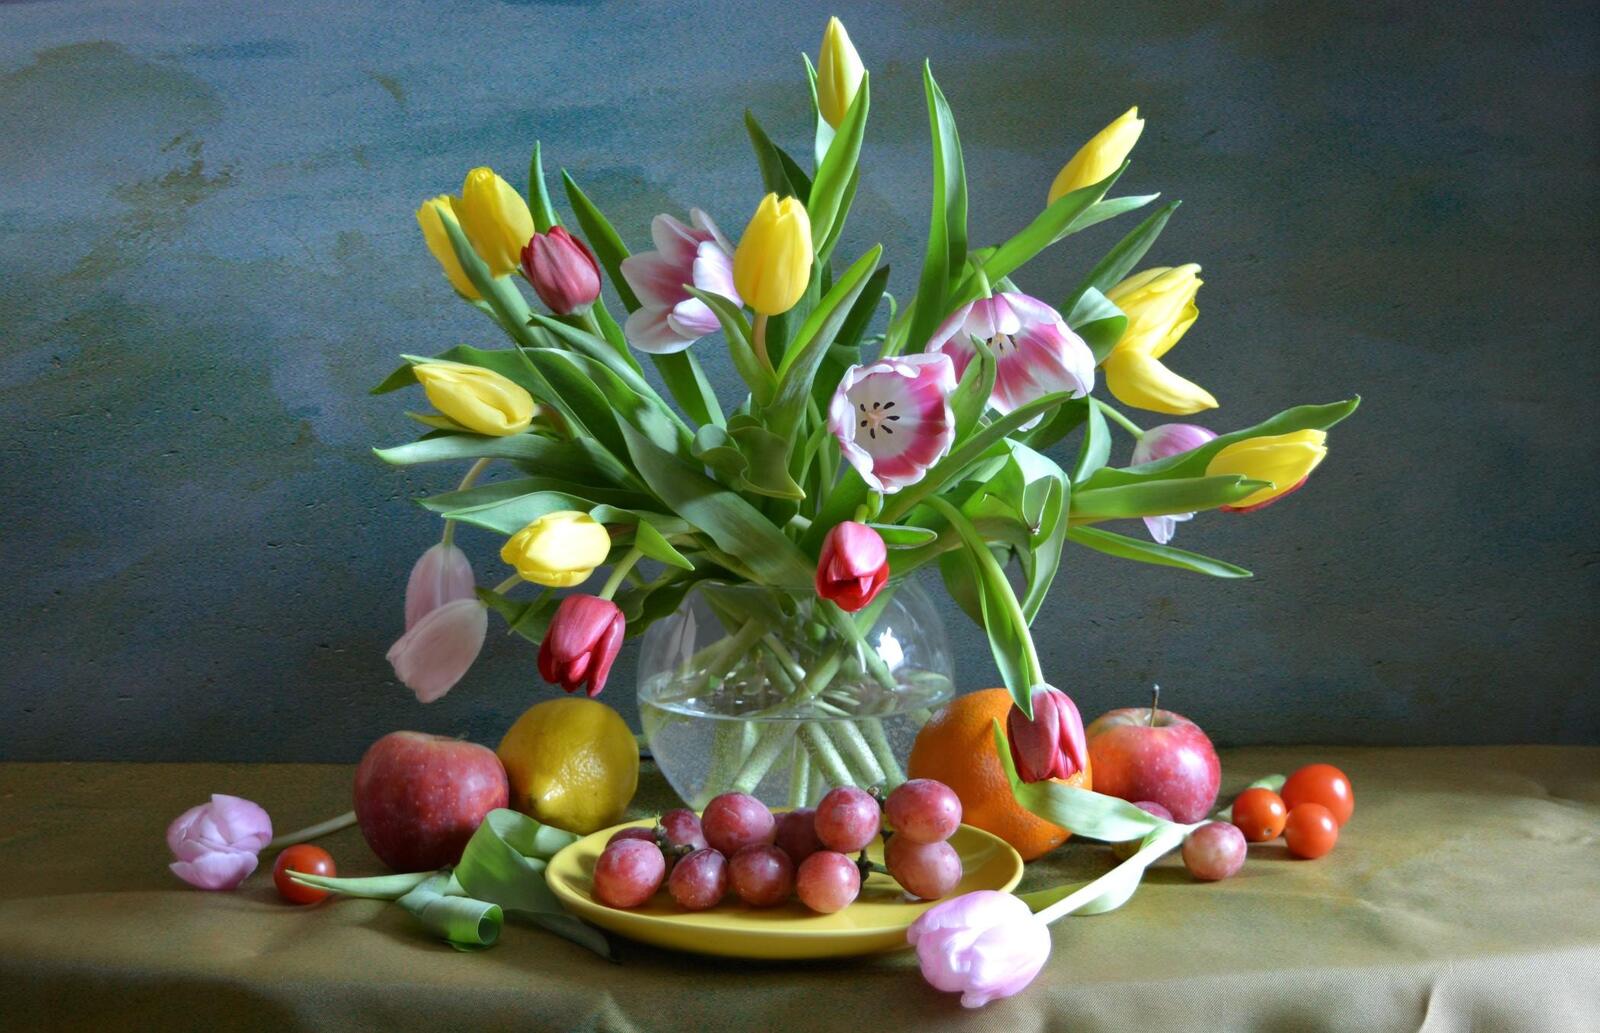 Wallpapers bouquet tulips grapes on the desktop